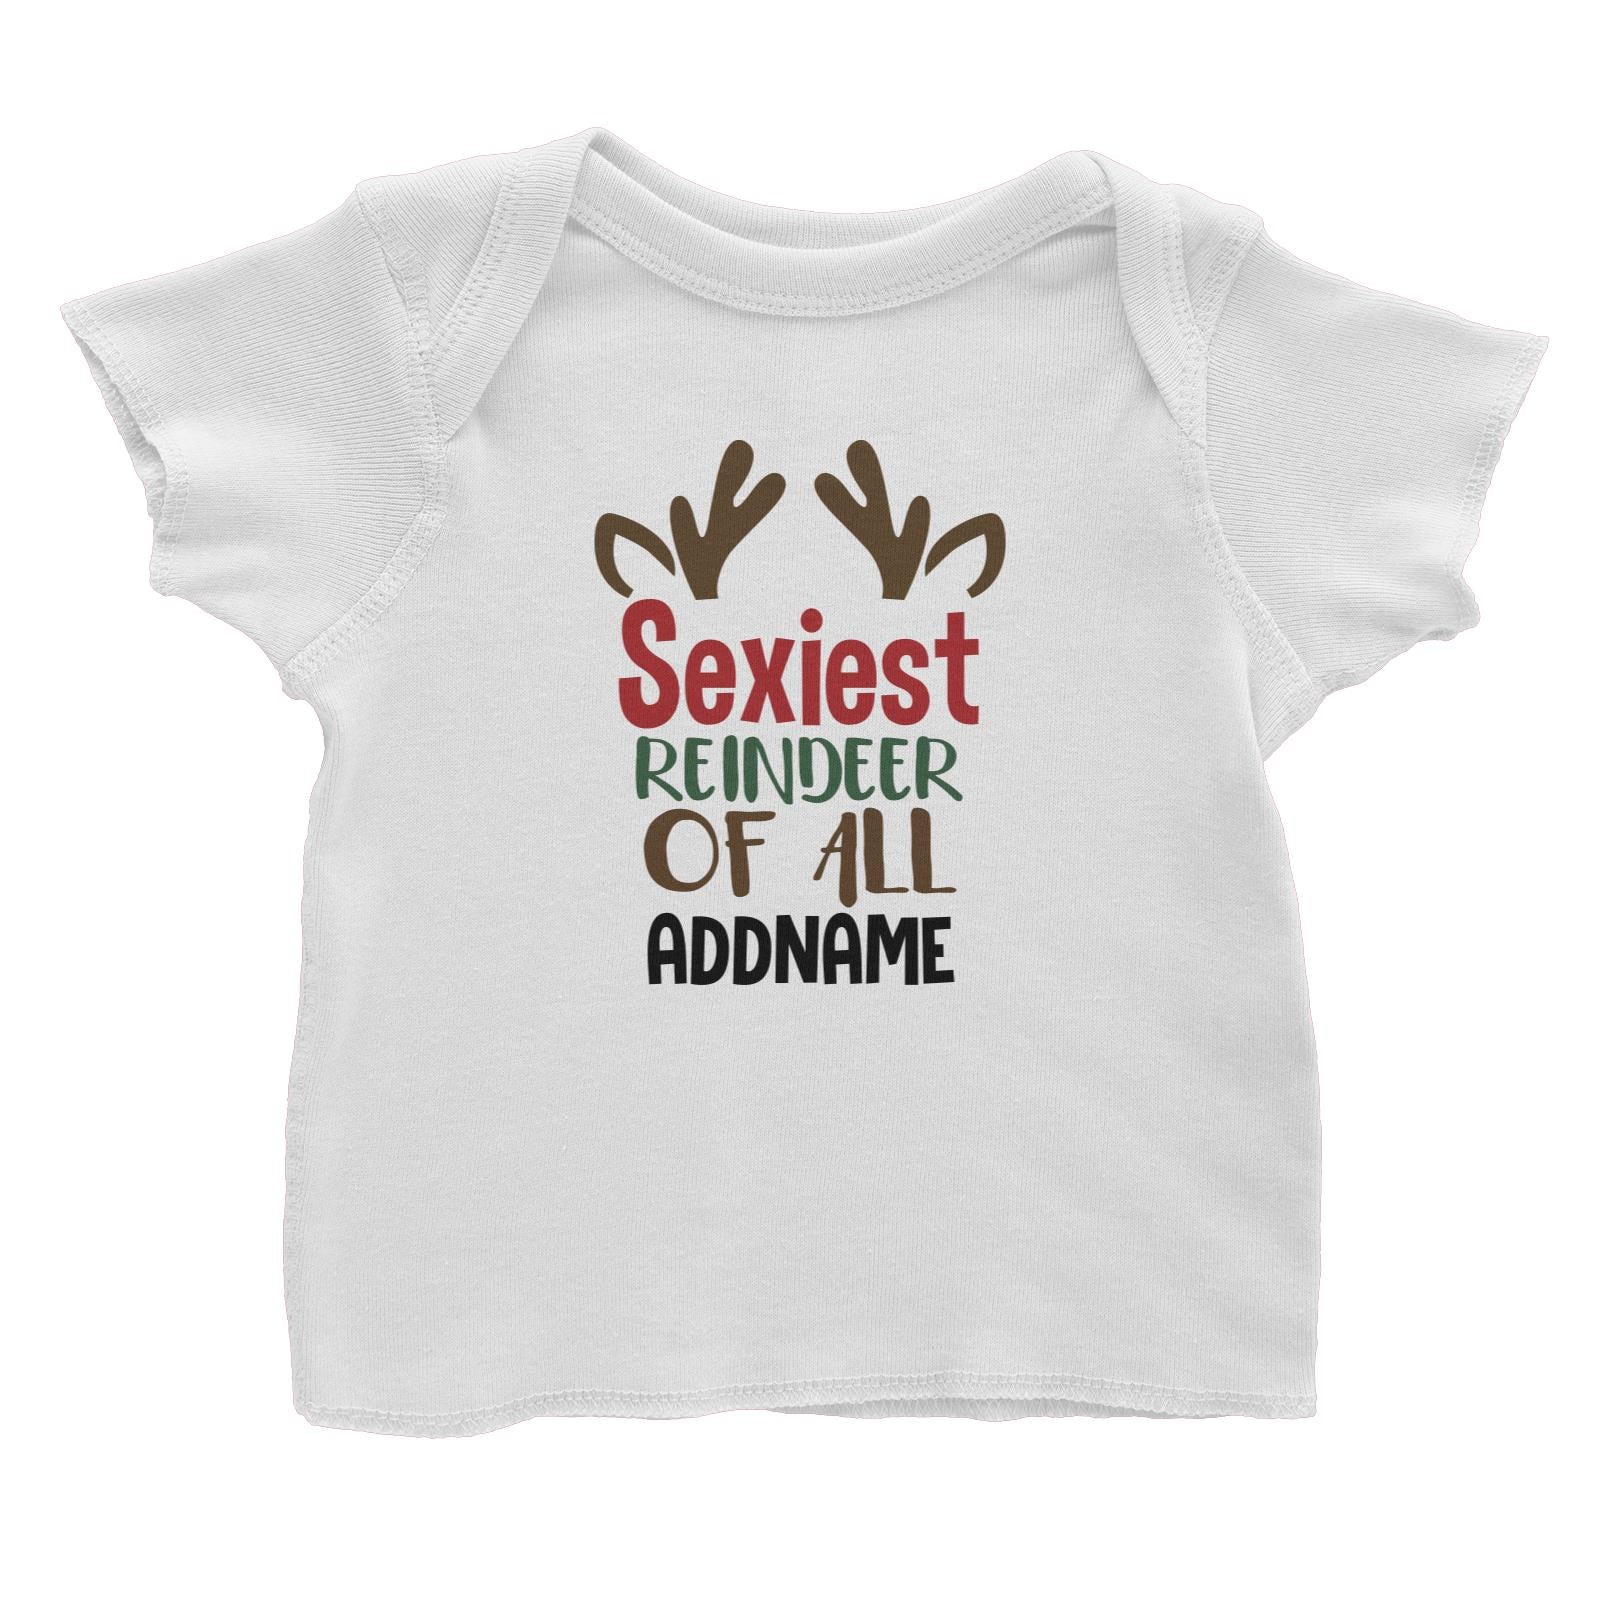 Xmas Sexiest Reindeer of All Baby T-Shirt